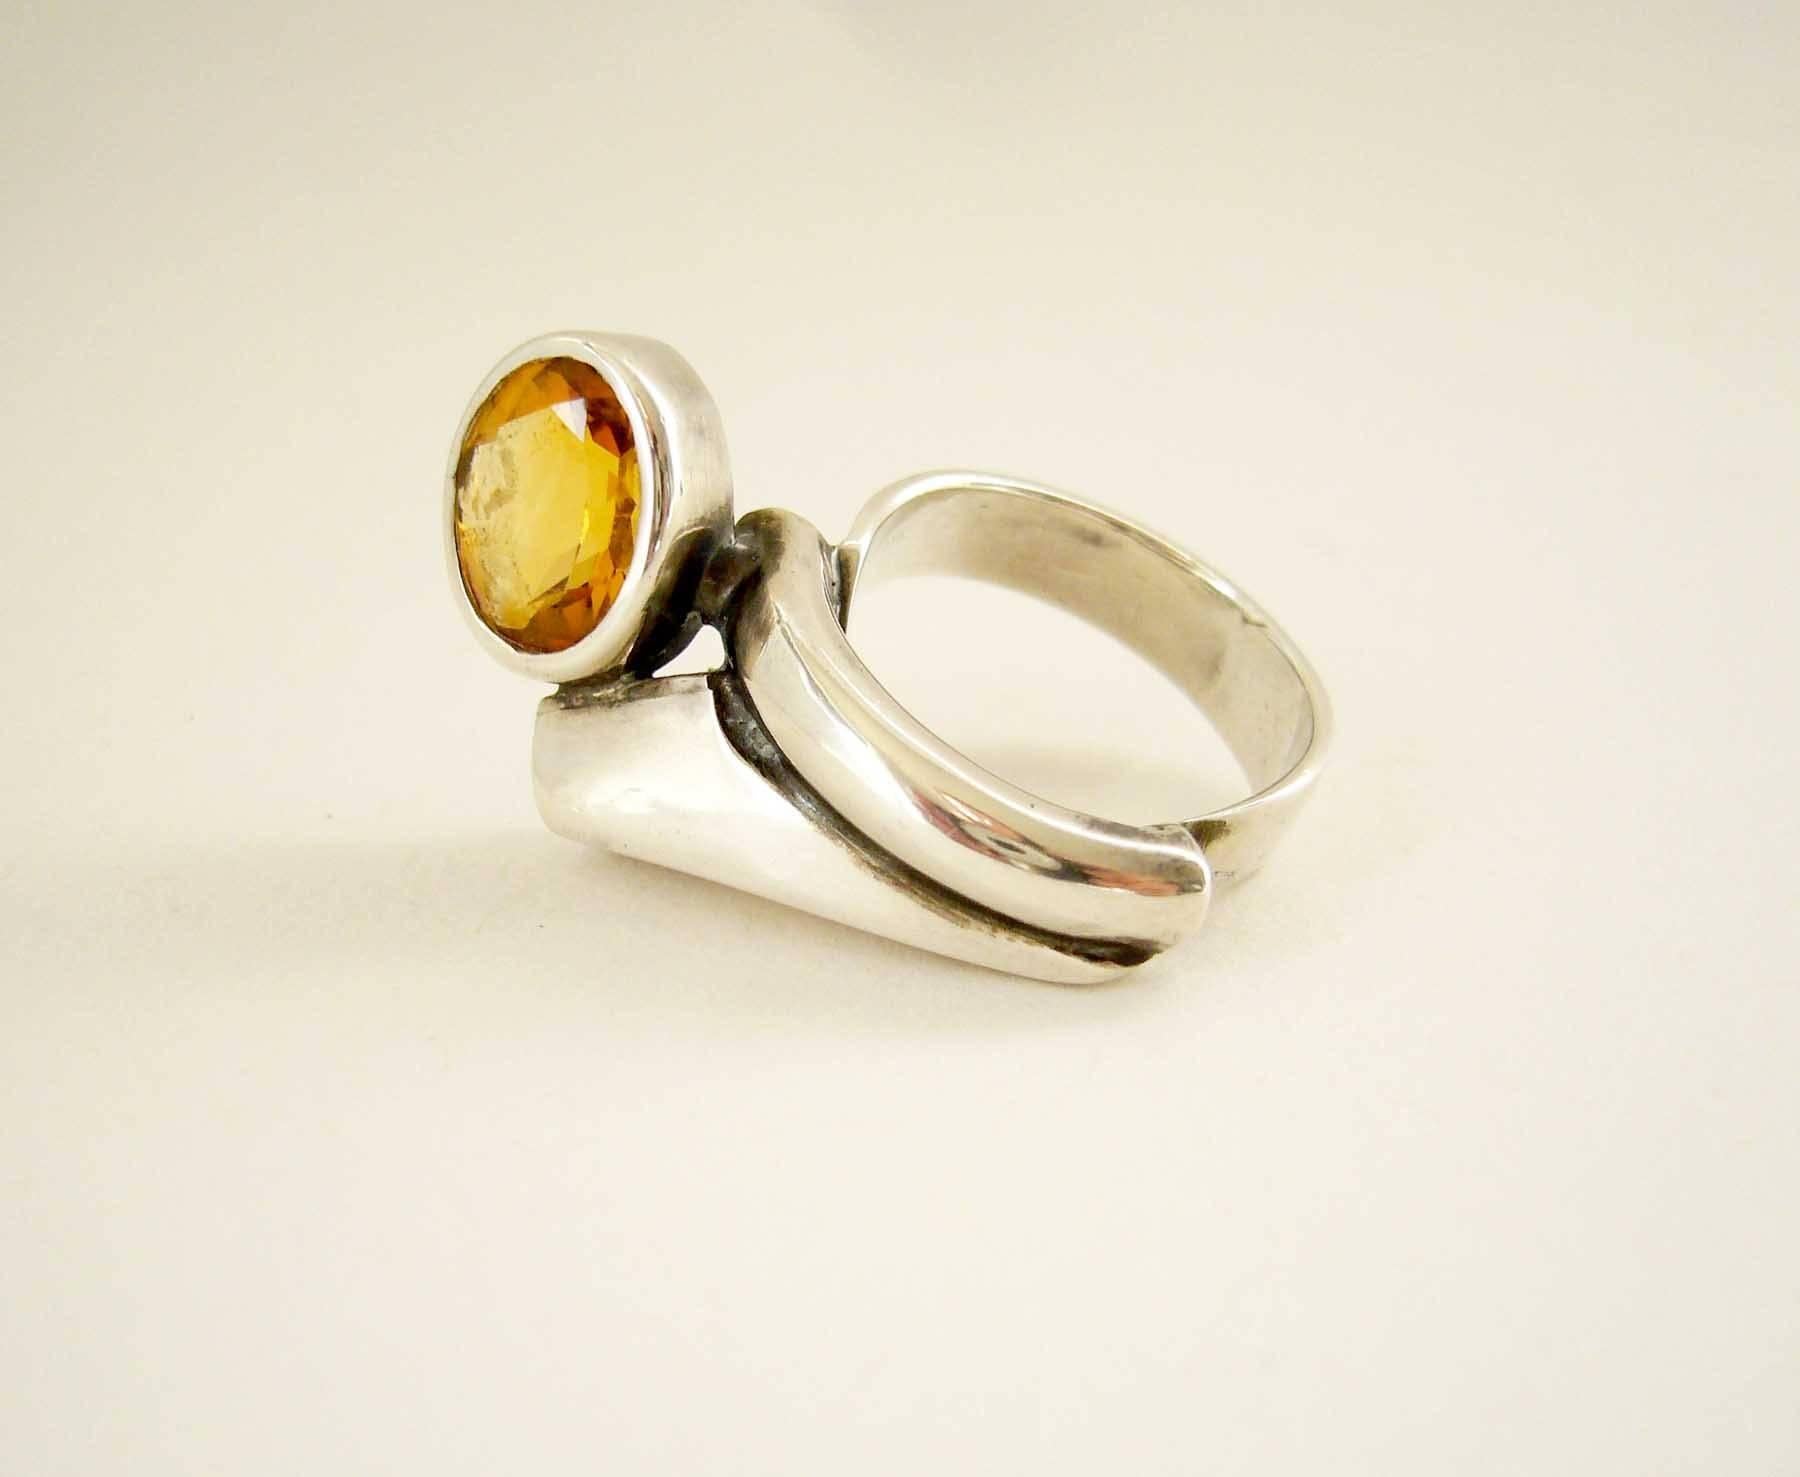 1970's sterling silver ring with faceted citrine stone created by French jeweler Suzanne Somogy.  Ring is a finger size 5 and crosses over slightly to the next finger.   Signed Somogy on on its underside and French hallmarks on the shank.  In very